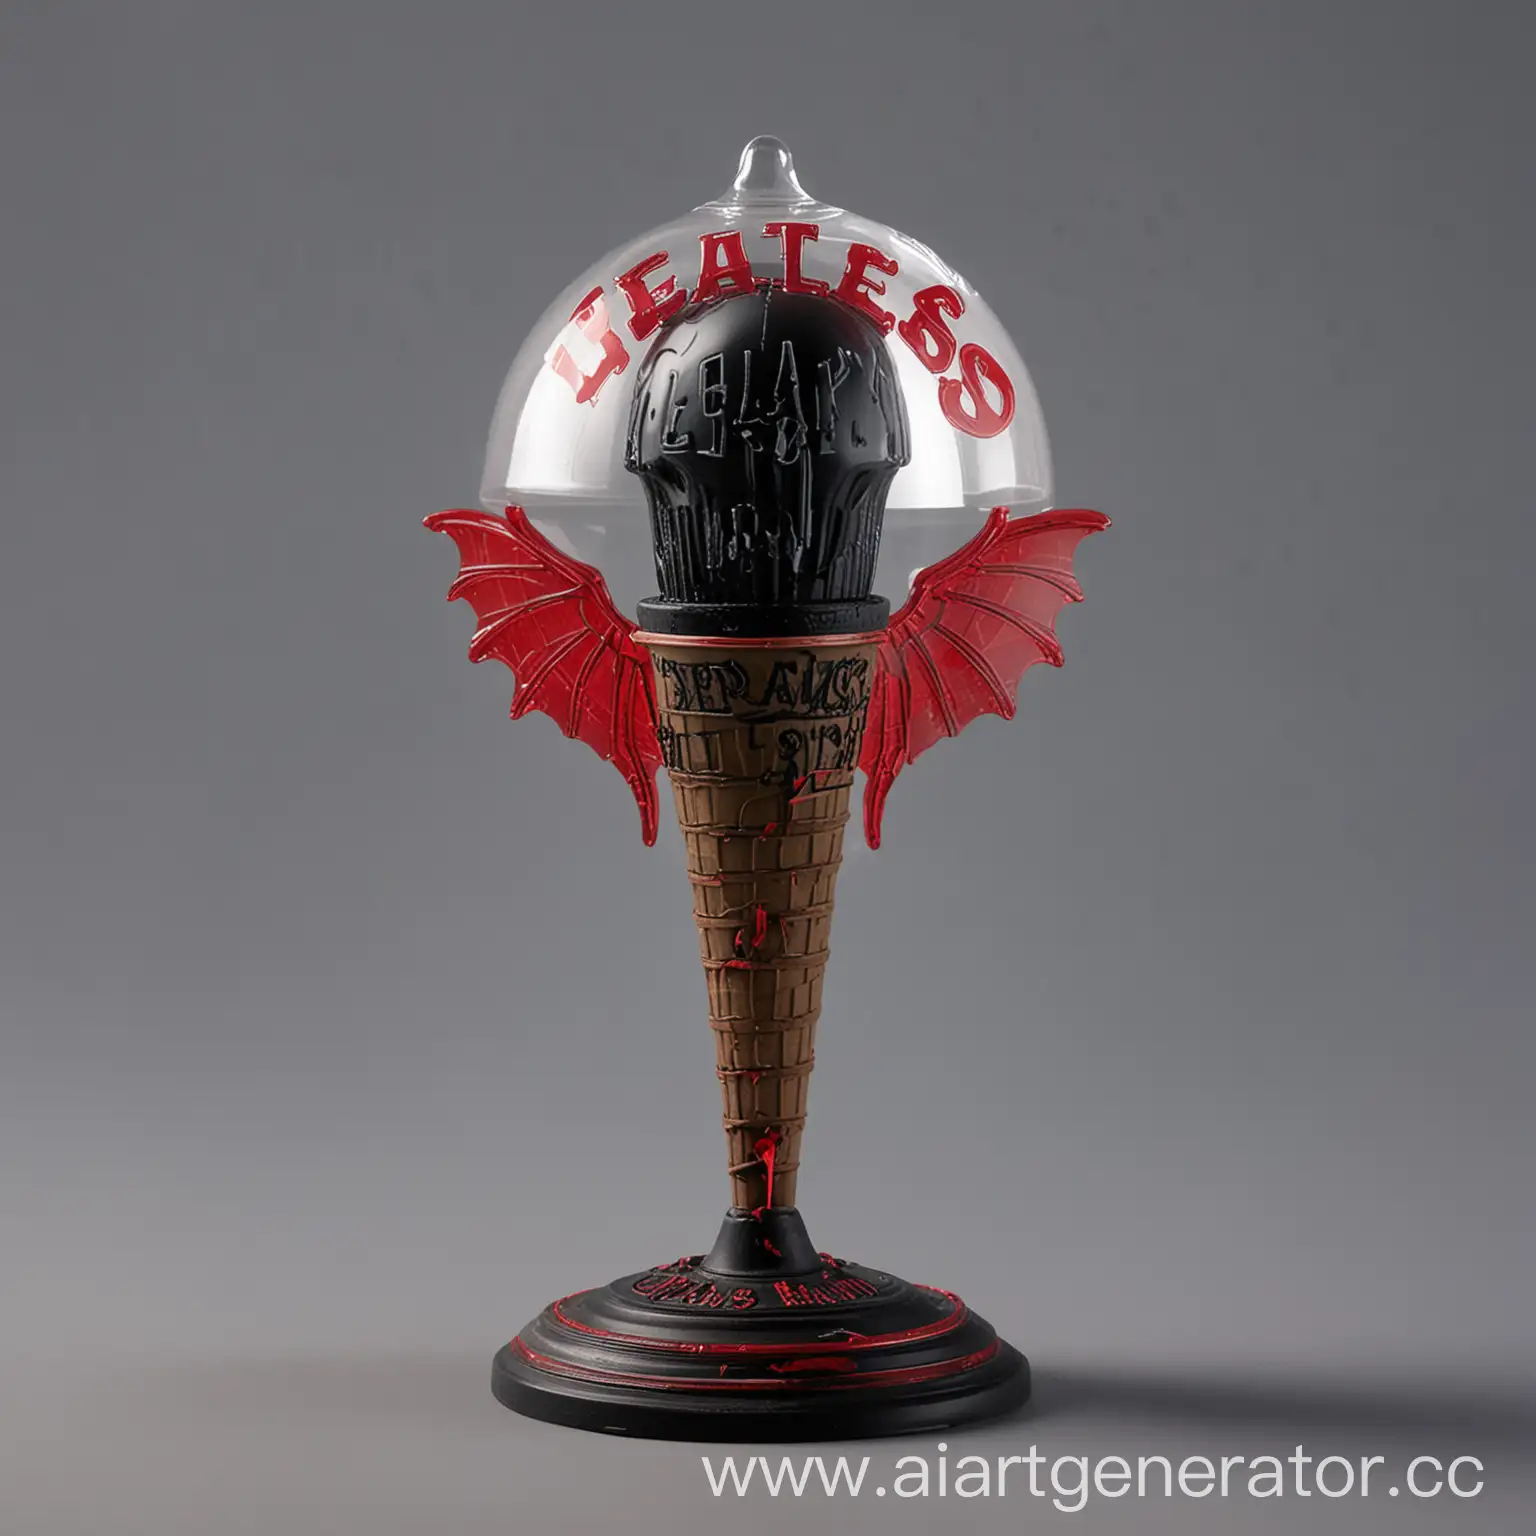 Heartless-Demon-Ear-Idol-Sculpture-Black-Laystick-with-Red-Lines-and-Glowing-Dome